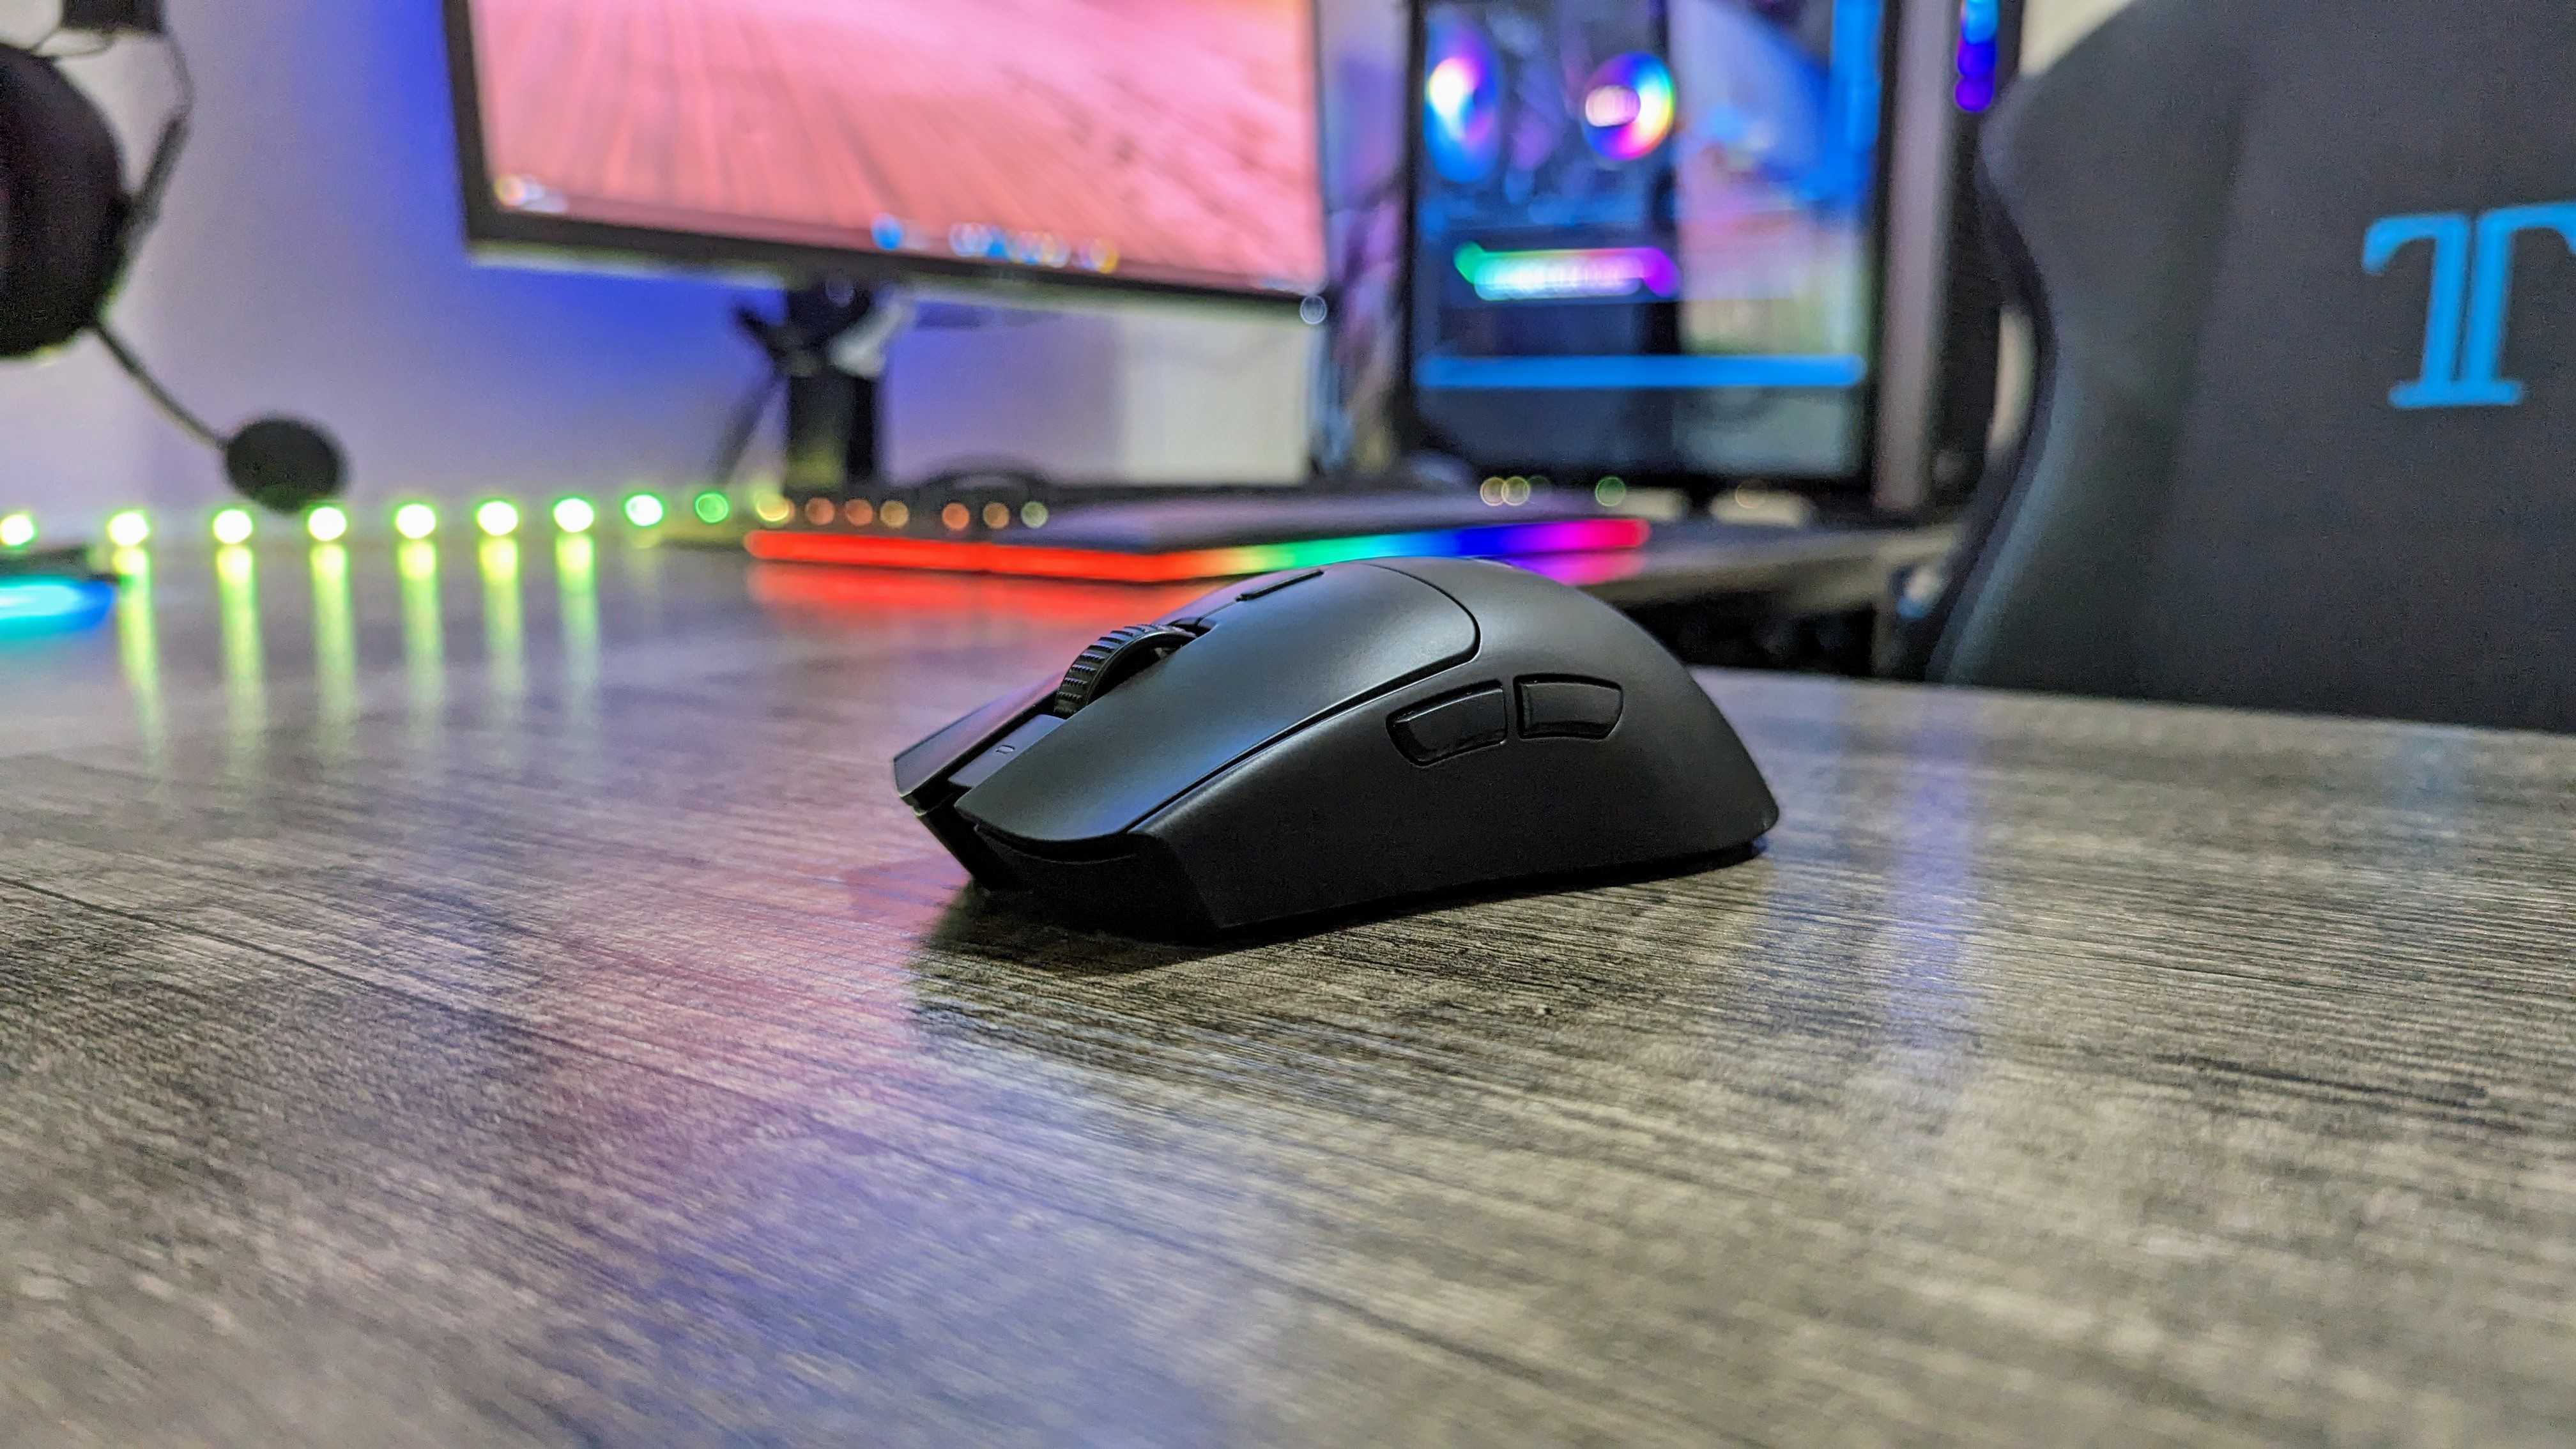 Razer Viper V3 HyperSpeed review: An affordable gaming mouse that